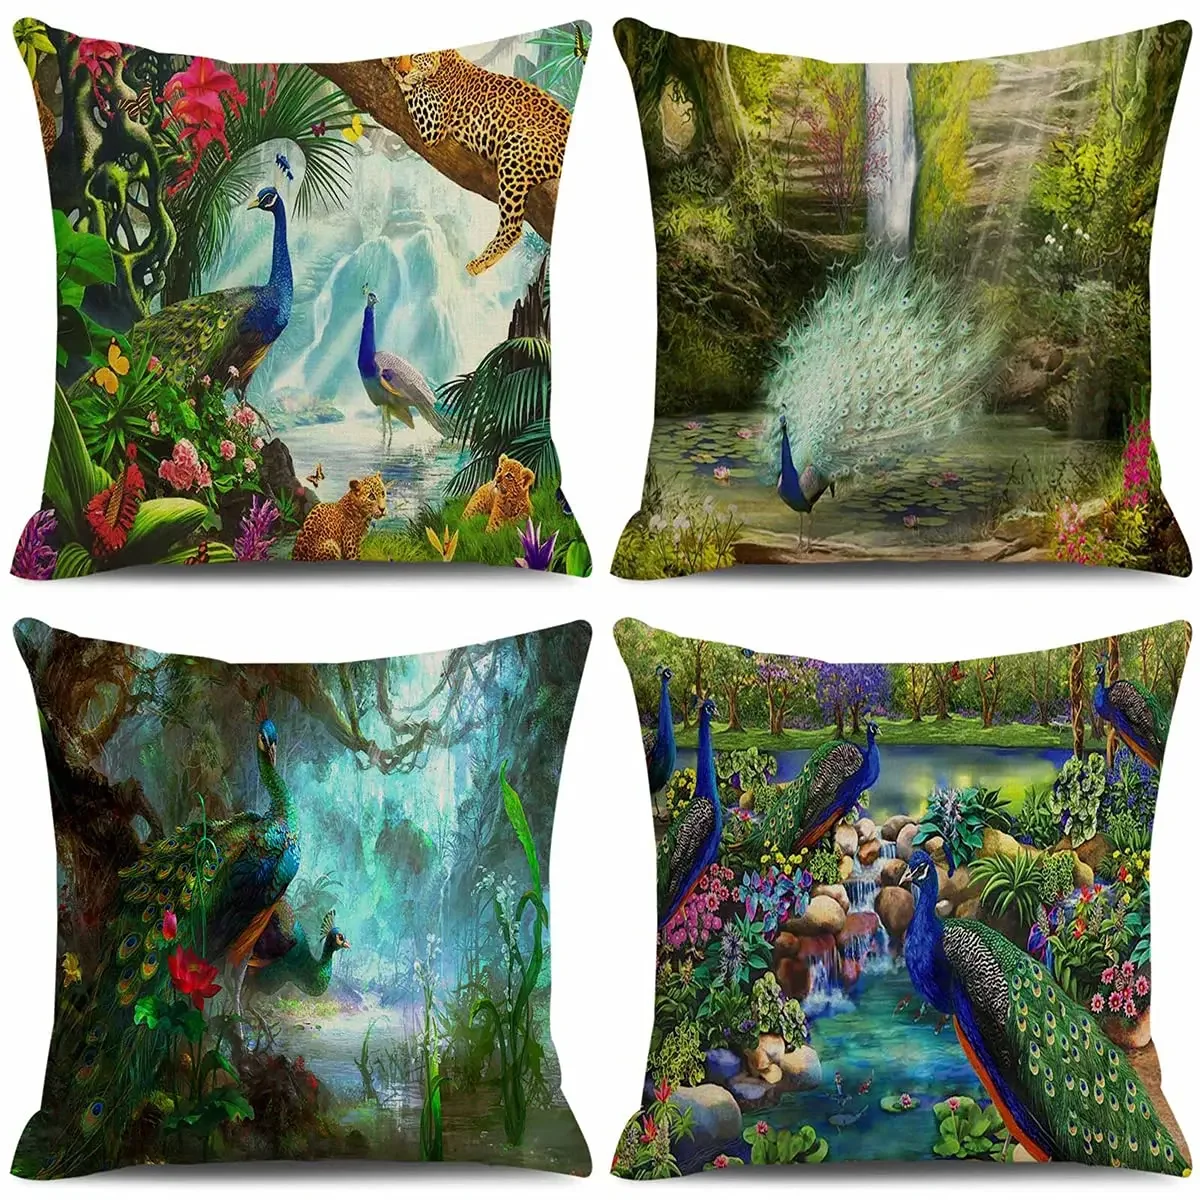 

Forest Peacock Print Linen Pillowcase 40*40 Living Room Sofa Decoration Cushion Cover 60*60 Home Decoration 50*50 Customizable